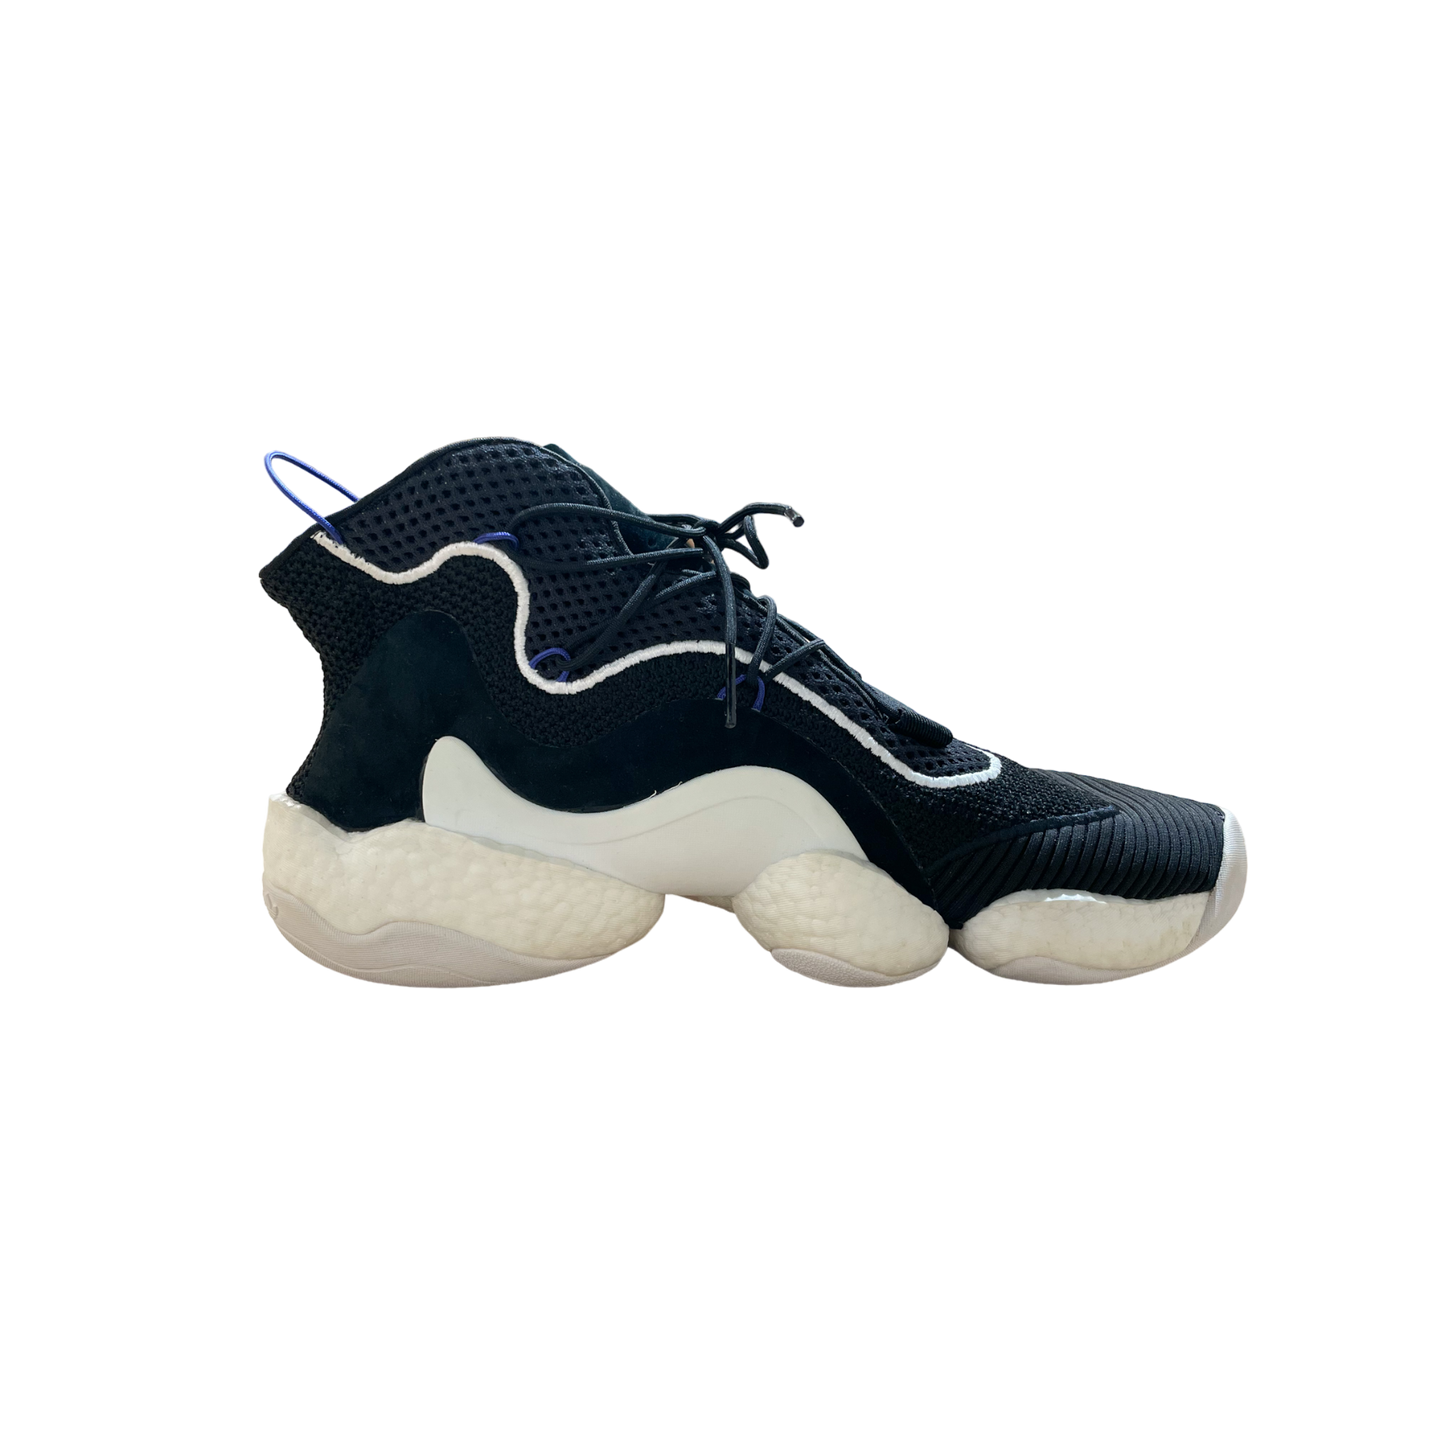 Adidas Crazy BYW LVL 1 Black White (Used/Refreshed)